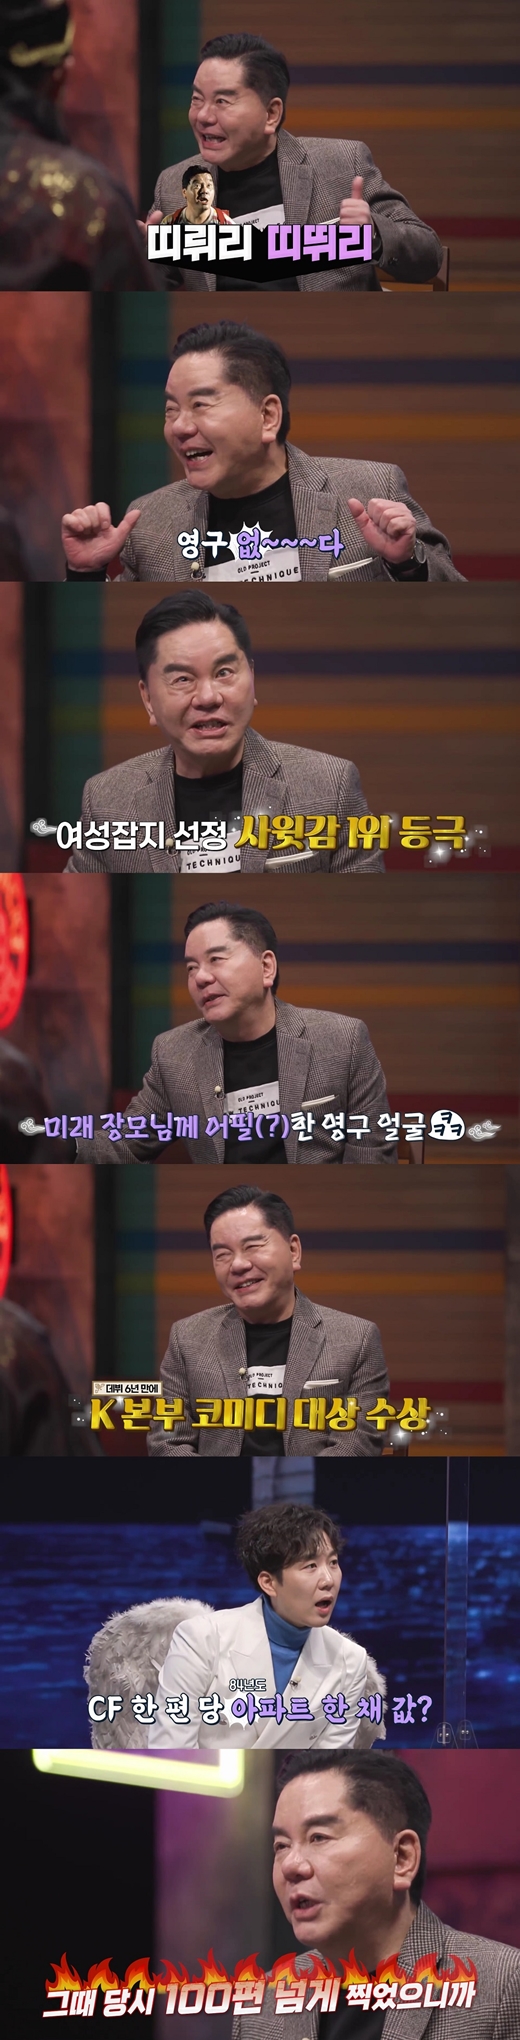 Comedian and film director Shim Hyung-rae has revealed his transcendental income during his prime.On MBN God and the Blind, which is broadcasted on the 27th, Shim Hyung-rae, the main character of the permanent character who evaluated South Korea as the first commander of the 80s and 90s, will be on a real-world talk between heaven and hell.In the broadcast, the birth of the permanent episode of the The essence of slapstick comedy and legendary fool of gag, the income of the prime time when the advertising and music charts were raised, the moment when children became SF movie directors in superhero actors, and the first-row intuition of the permanent show of glory,Shim Hyung-rae said, After debuting as KBSs first comedian in 1982, he became a unique character in his debut seven months as a permanent character.I broke the barrier of Lee Ju-il, the emperor of comedy, and came first, he said.I have only taken eight years of exclusive models and more than 100 commercials, he said, referring to the explosive interest and popularity of the wall.Shim Hyung-rae also said, I received an apartment for each CF.I received 80 million won for one CF, he said. I had more than 100 advertisements, so I was able to buy 160 apartments at the time.In 1984, the company bought an apartment in Apgujeong-dong for 78 million won, which is about 4 billion won now.At that time, the movie Permanent and Dingchi was received as a running guarantee, which was seven times the general salary.When the most money other actors received was 30 million won, they received 200 million won, he recalled.He will also be, Shim Hyung-rae is called Charlie Chaplin of Korea and has spent a brilliant heyday through popular corners of various comedy programs such as Permanent Night, Book of the Side, Tomorrow is Champion and Animal Kingdom.In addition to winning the KBS comedy Grand Prize in his debut six years, he established the permanent art movie movie company in 1993 and expanded his career as a producer and film director to challenge the SF film industry.In 1999, it was selected as the first South Korea 21st century new intellectual.However, films that he caught megaphones, including Diwar and Last Gadder, starting with Tiranos claws and Yonggari, failed to win the box office, making him saddened by the turbulent life history of bankruptcy and divorce.Shim Hyung-rae, a God and a Blessed, will be broadcast at 9:50 pm on the 27th.